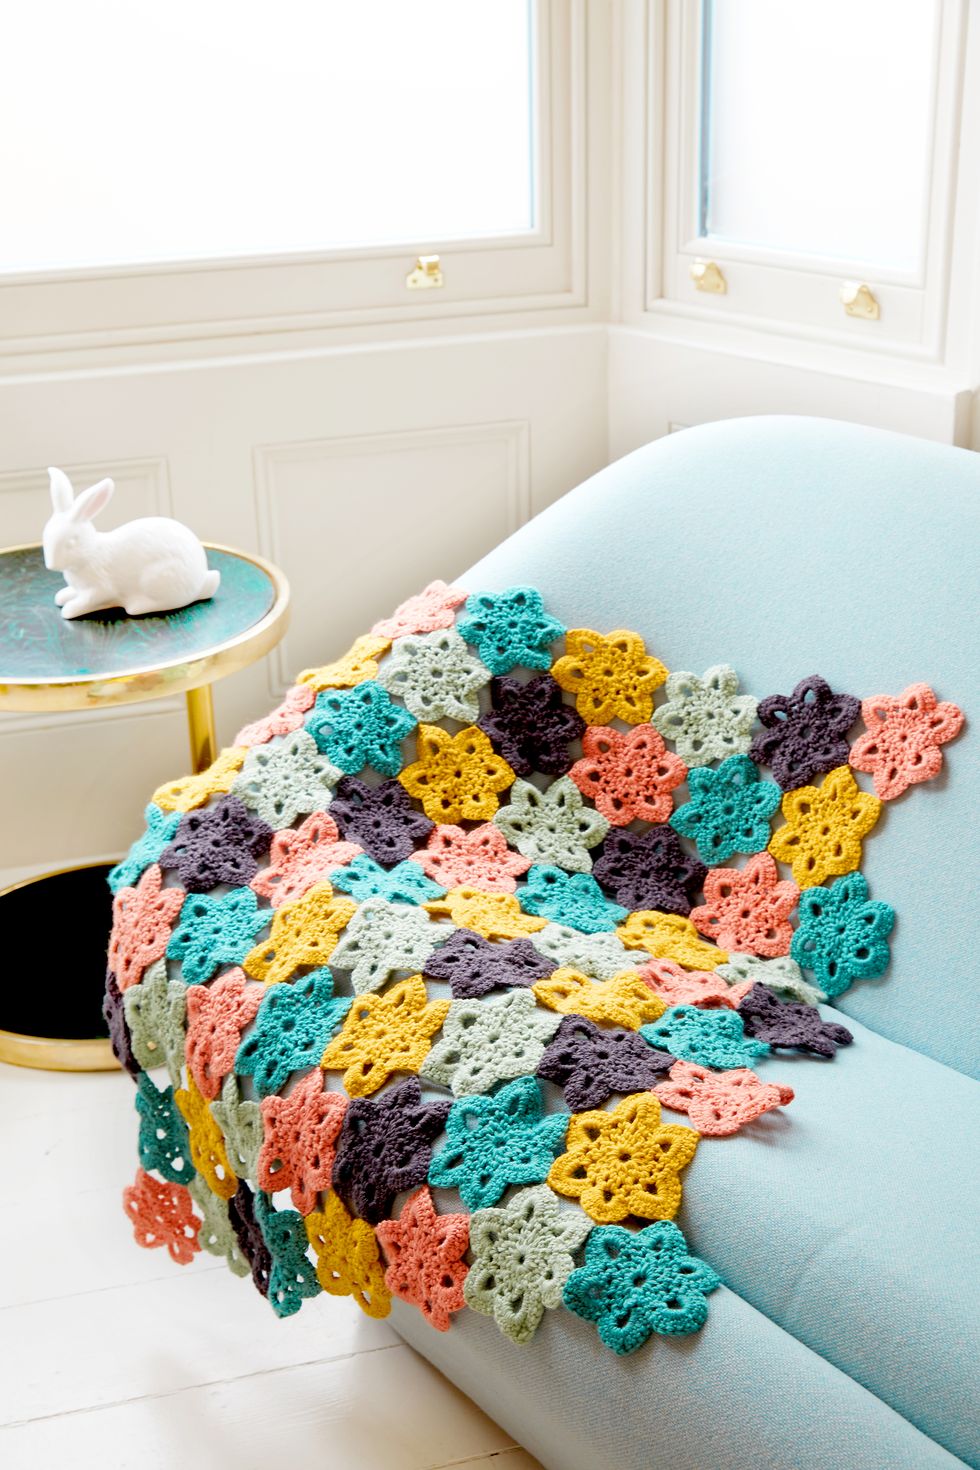 You Can Now Order My Book! The Art of Crochet Blankets